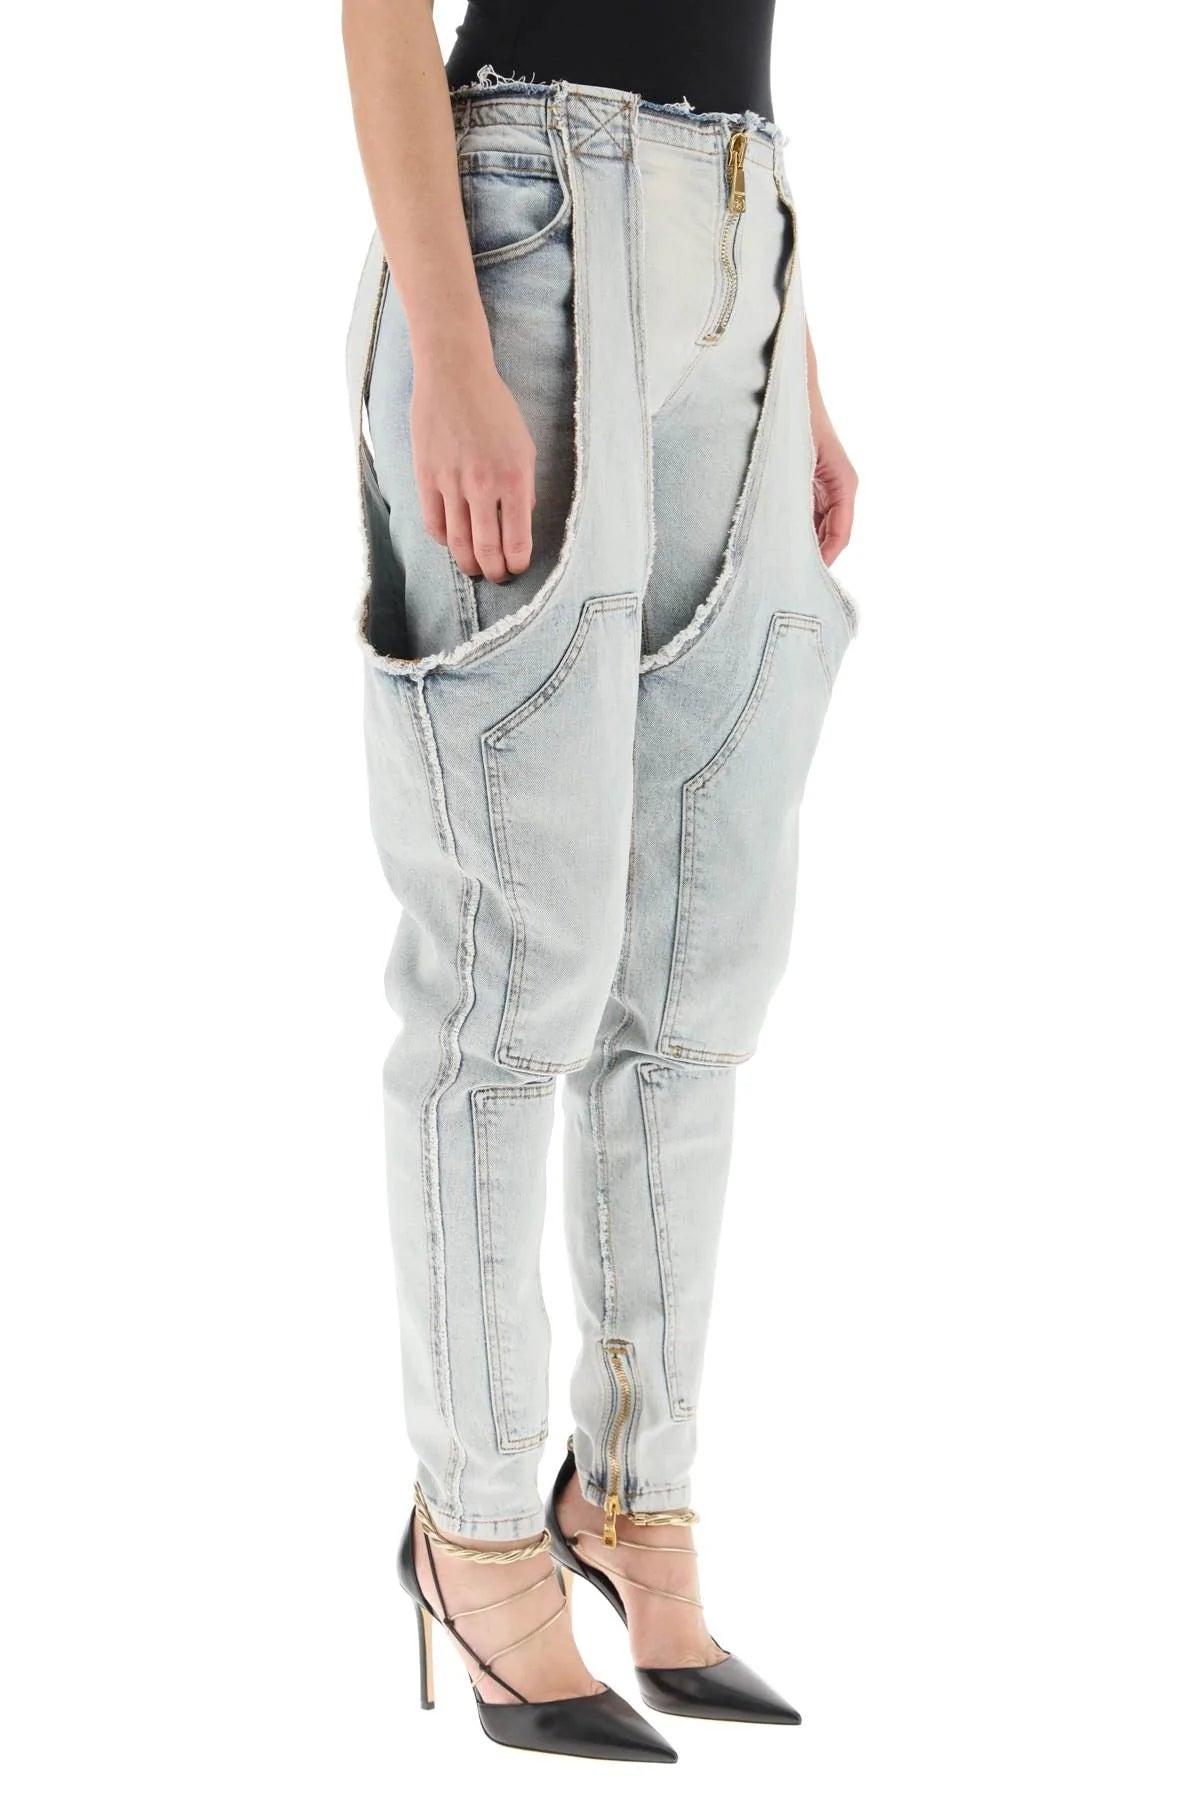 Balmain Jeans With Garter Effect Gaiters in Gray | Lyst